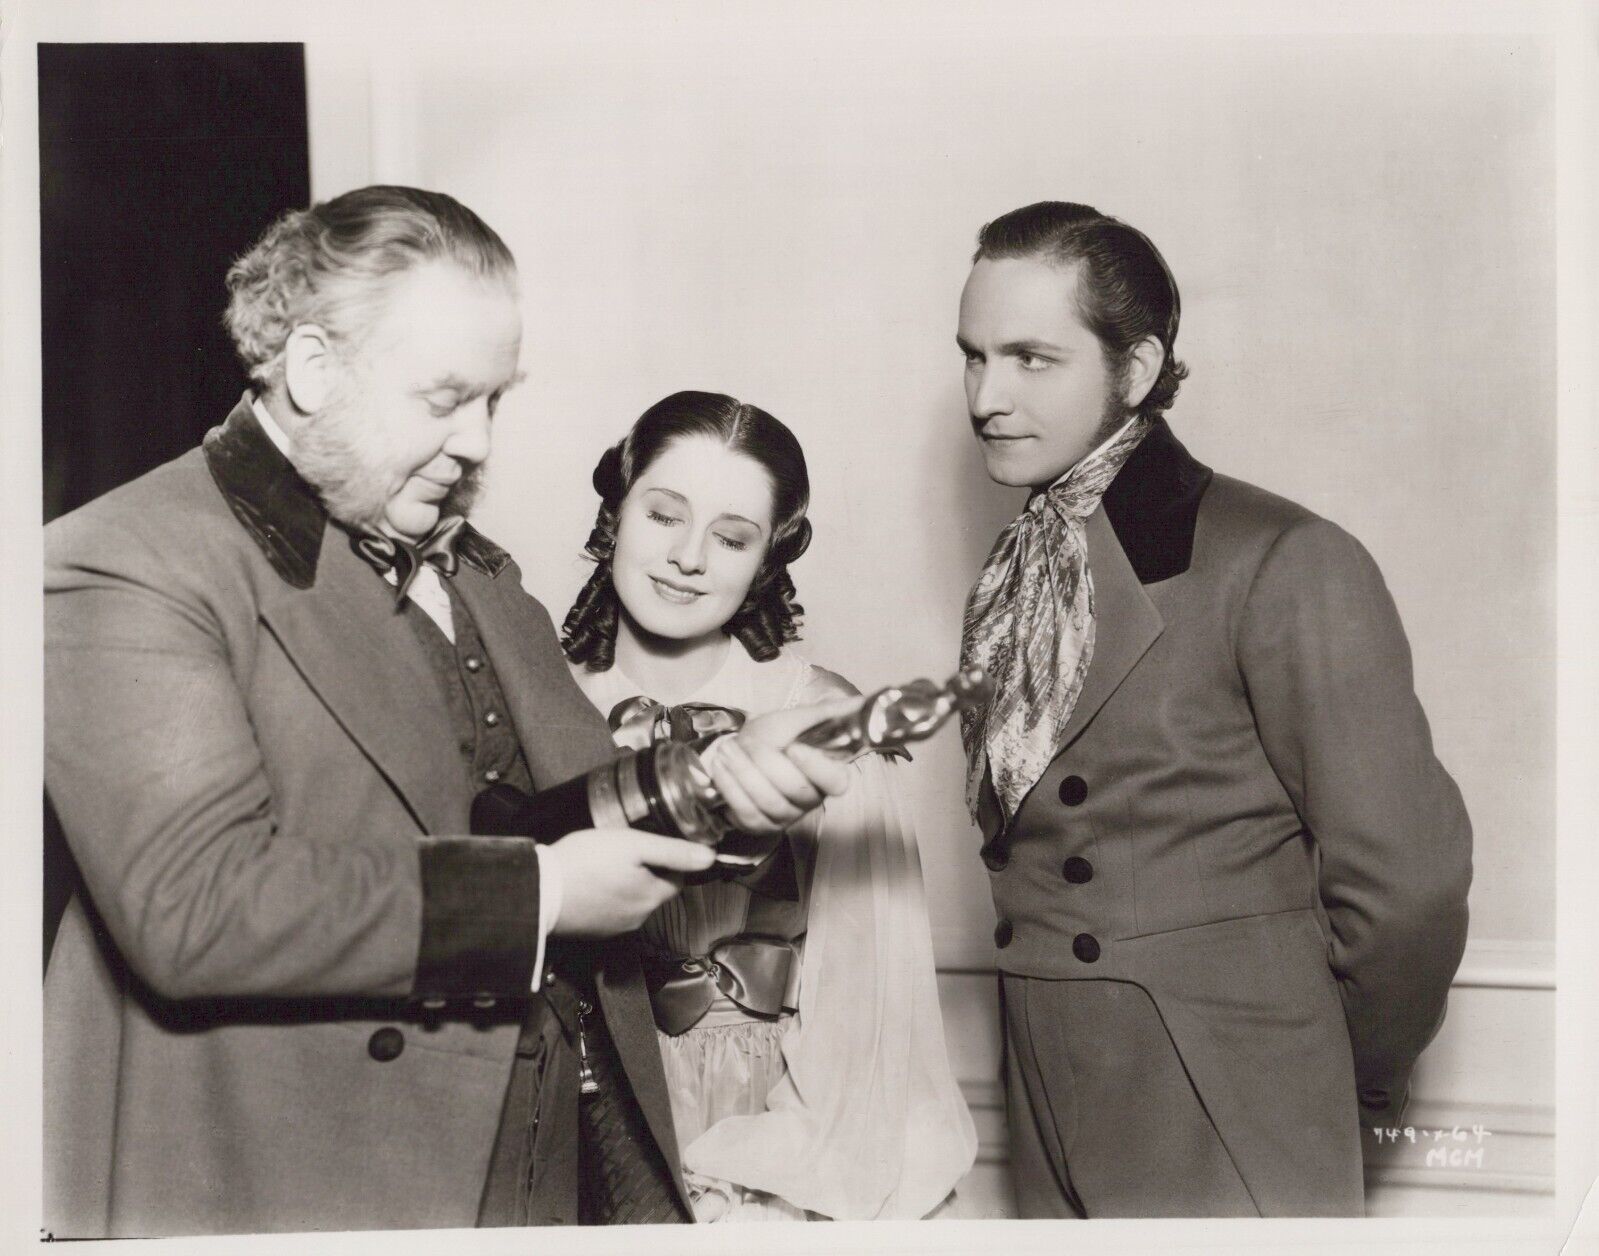 NORMA SHEARER + FREDRIC MARCH + CHARLES LAUGHTON CANDID OSCAR PHOTO 40s Photo 10